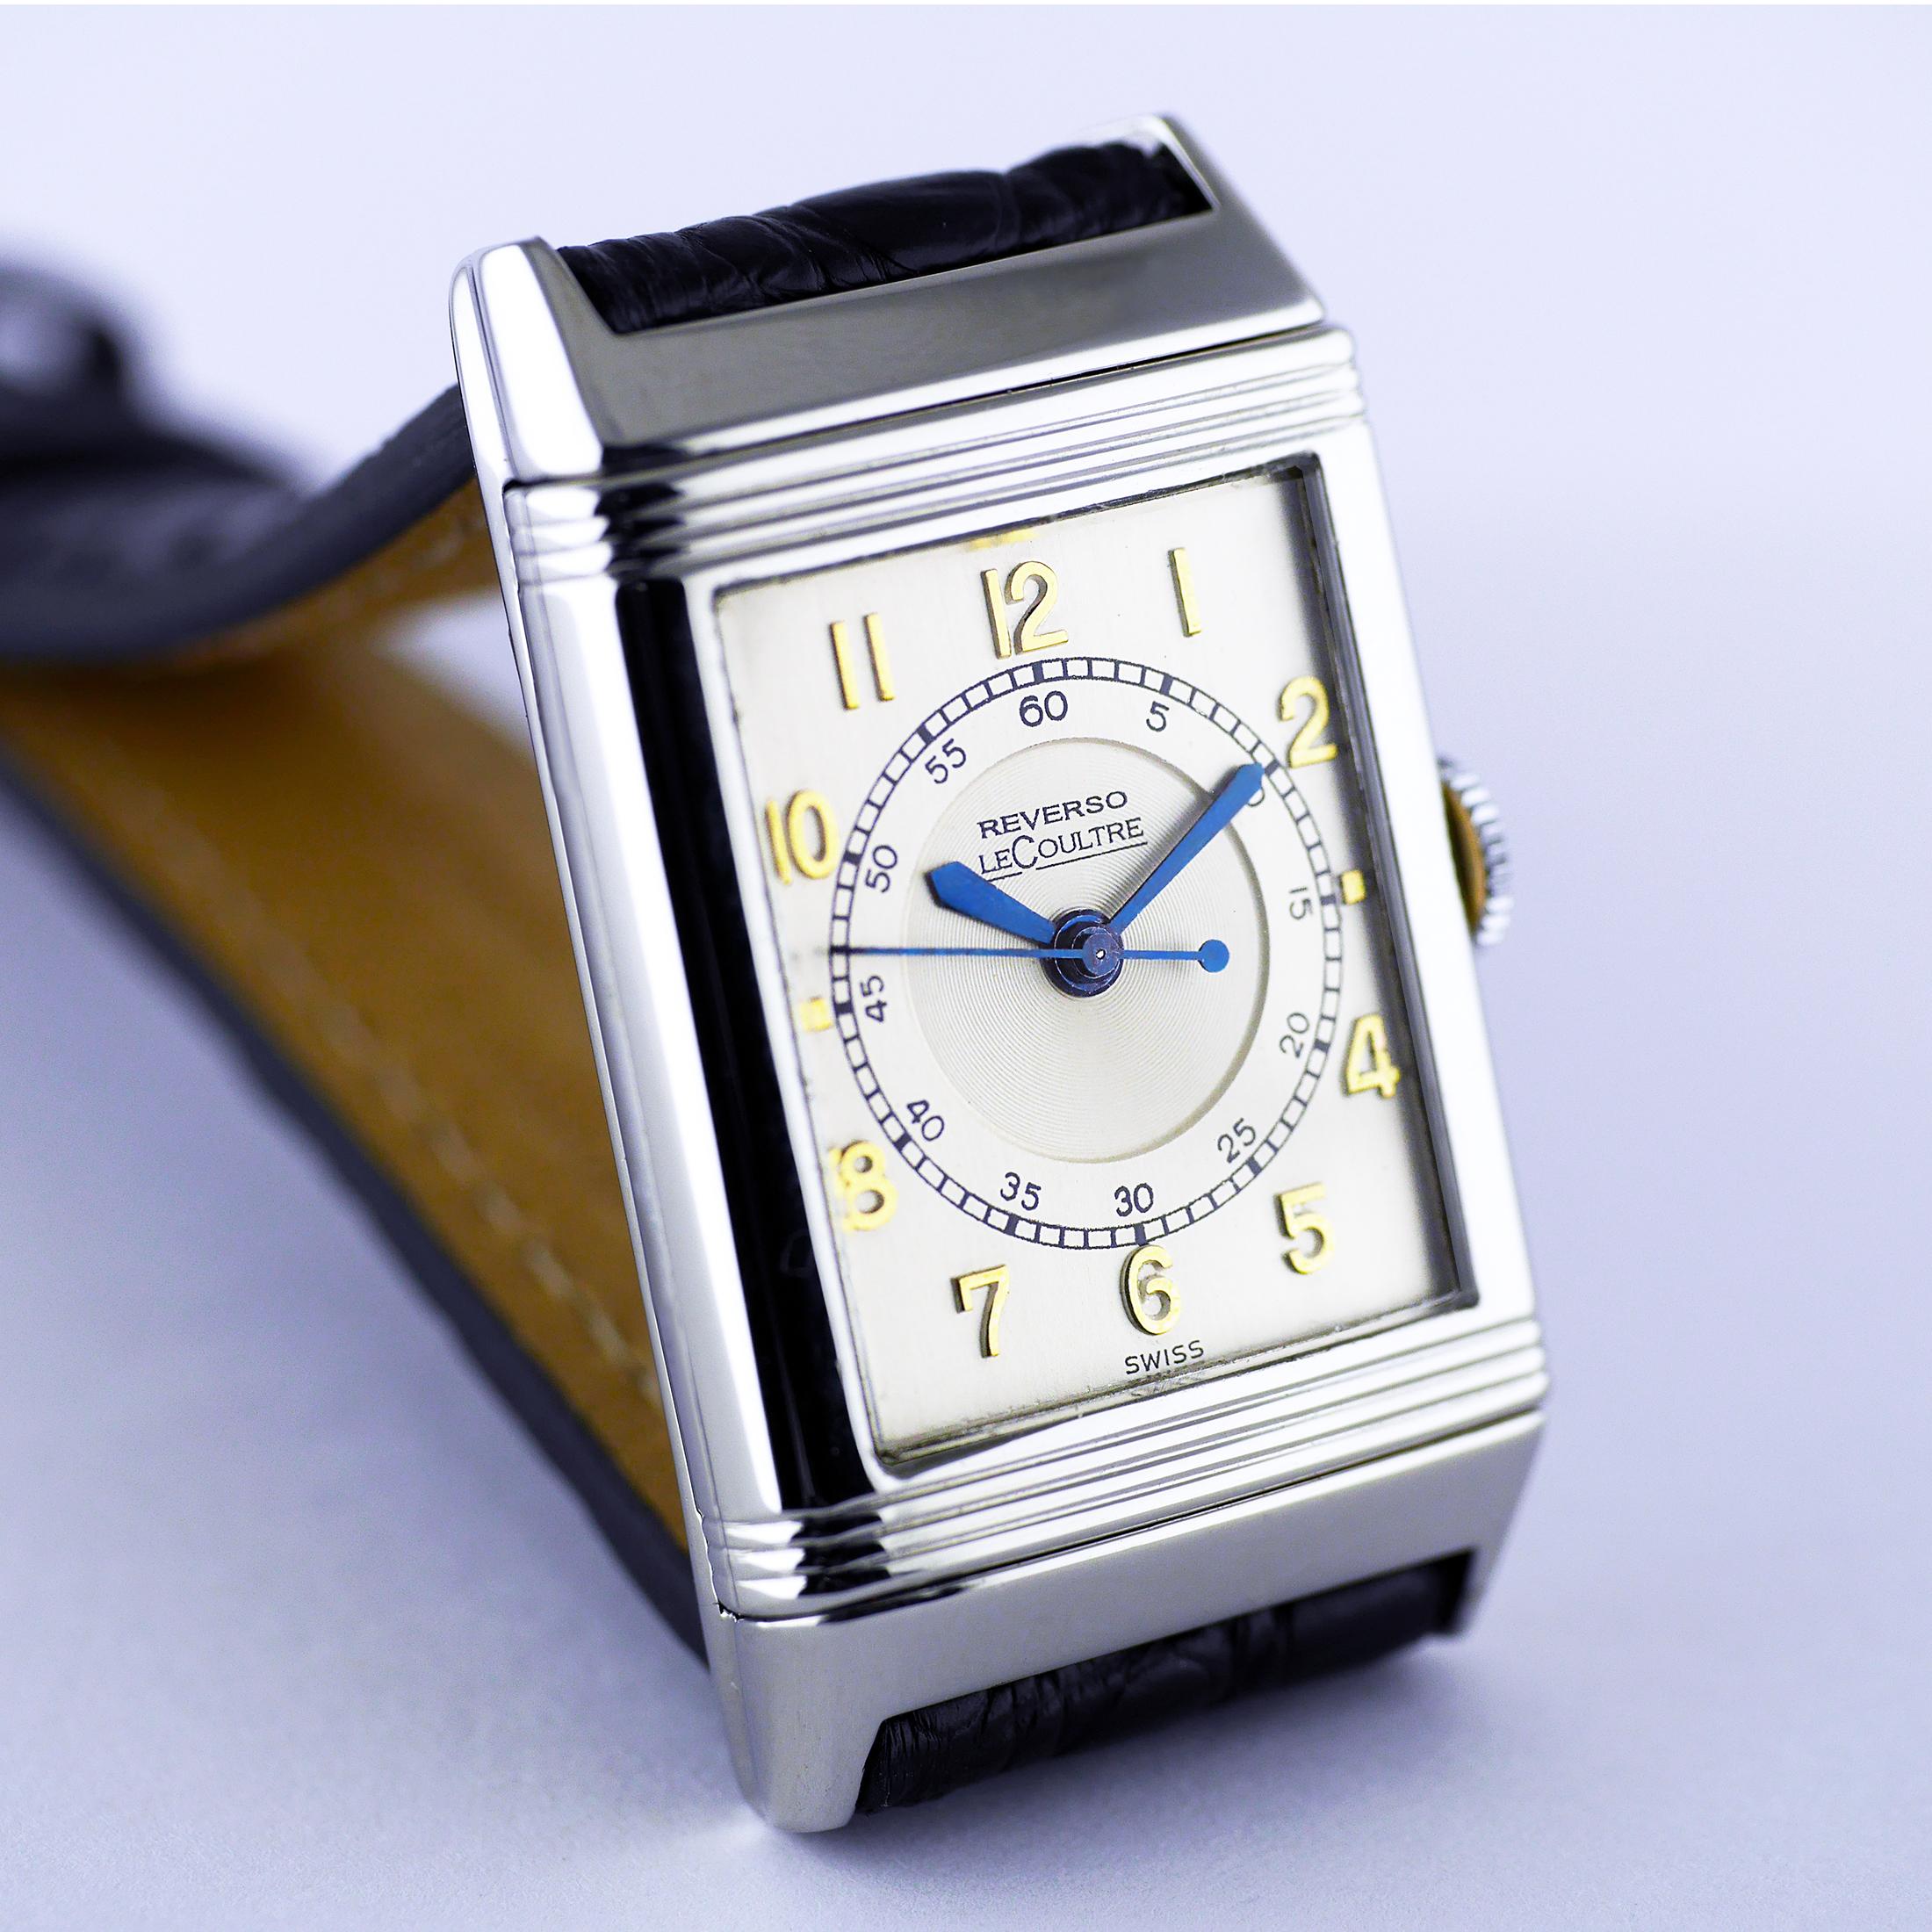 A fine and rare Art Deco Le Coultre Reverso wristwatch made in c1934.

The Reverso wristwatch was invented after a chance remark by Polo players in India during the colonial period, bemoaning that the glass on their watches was being smashed during